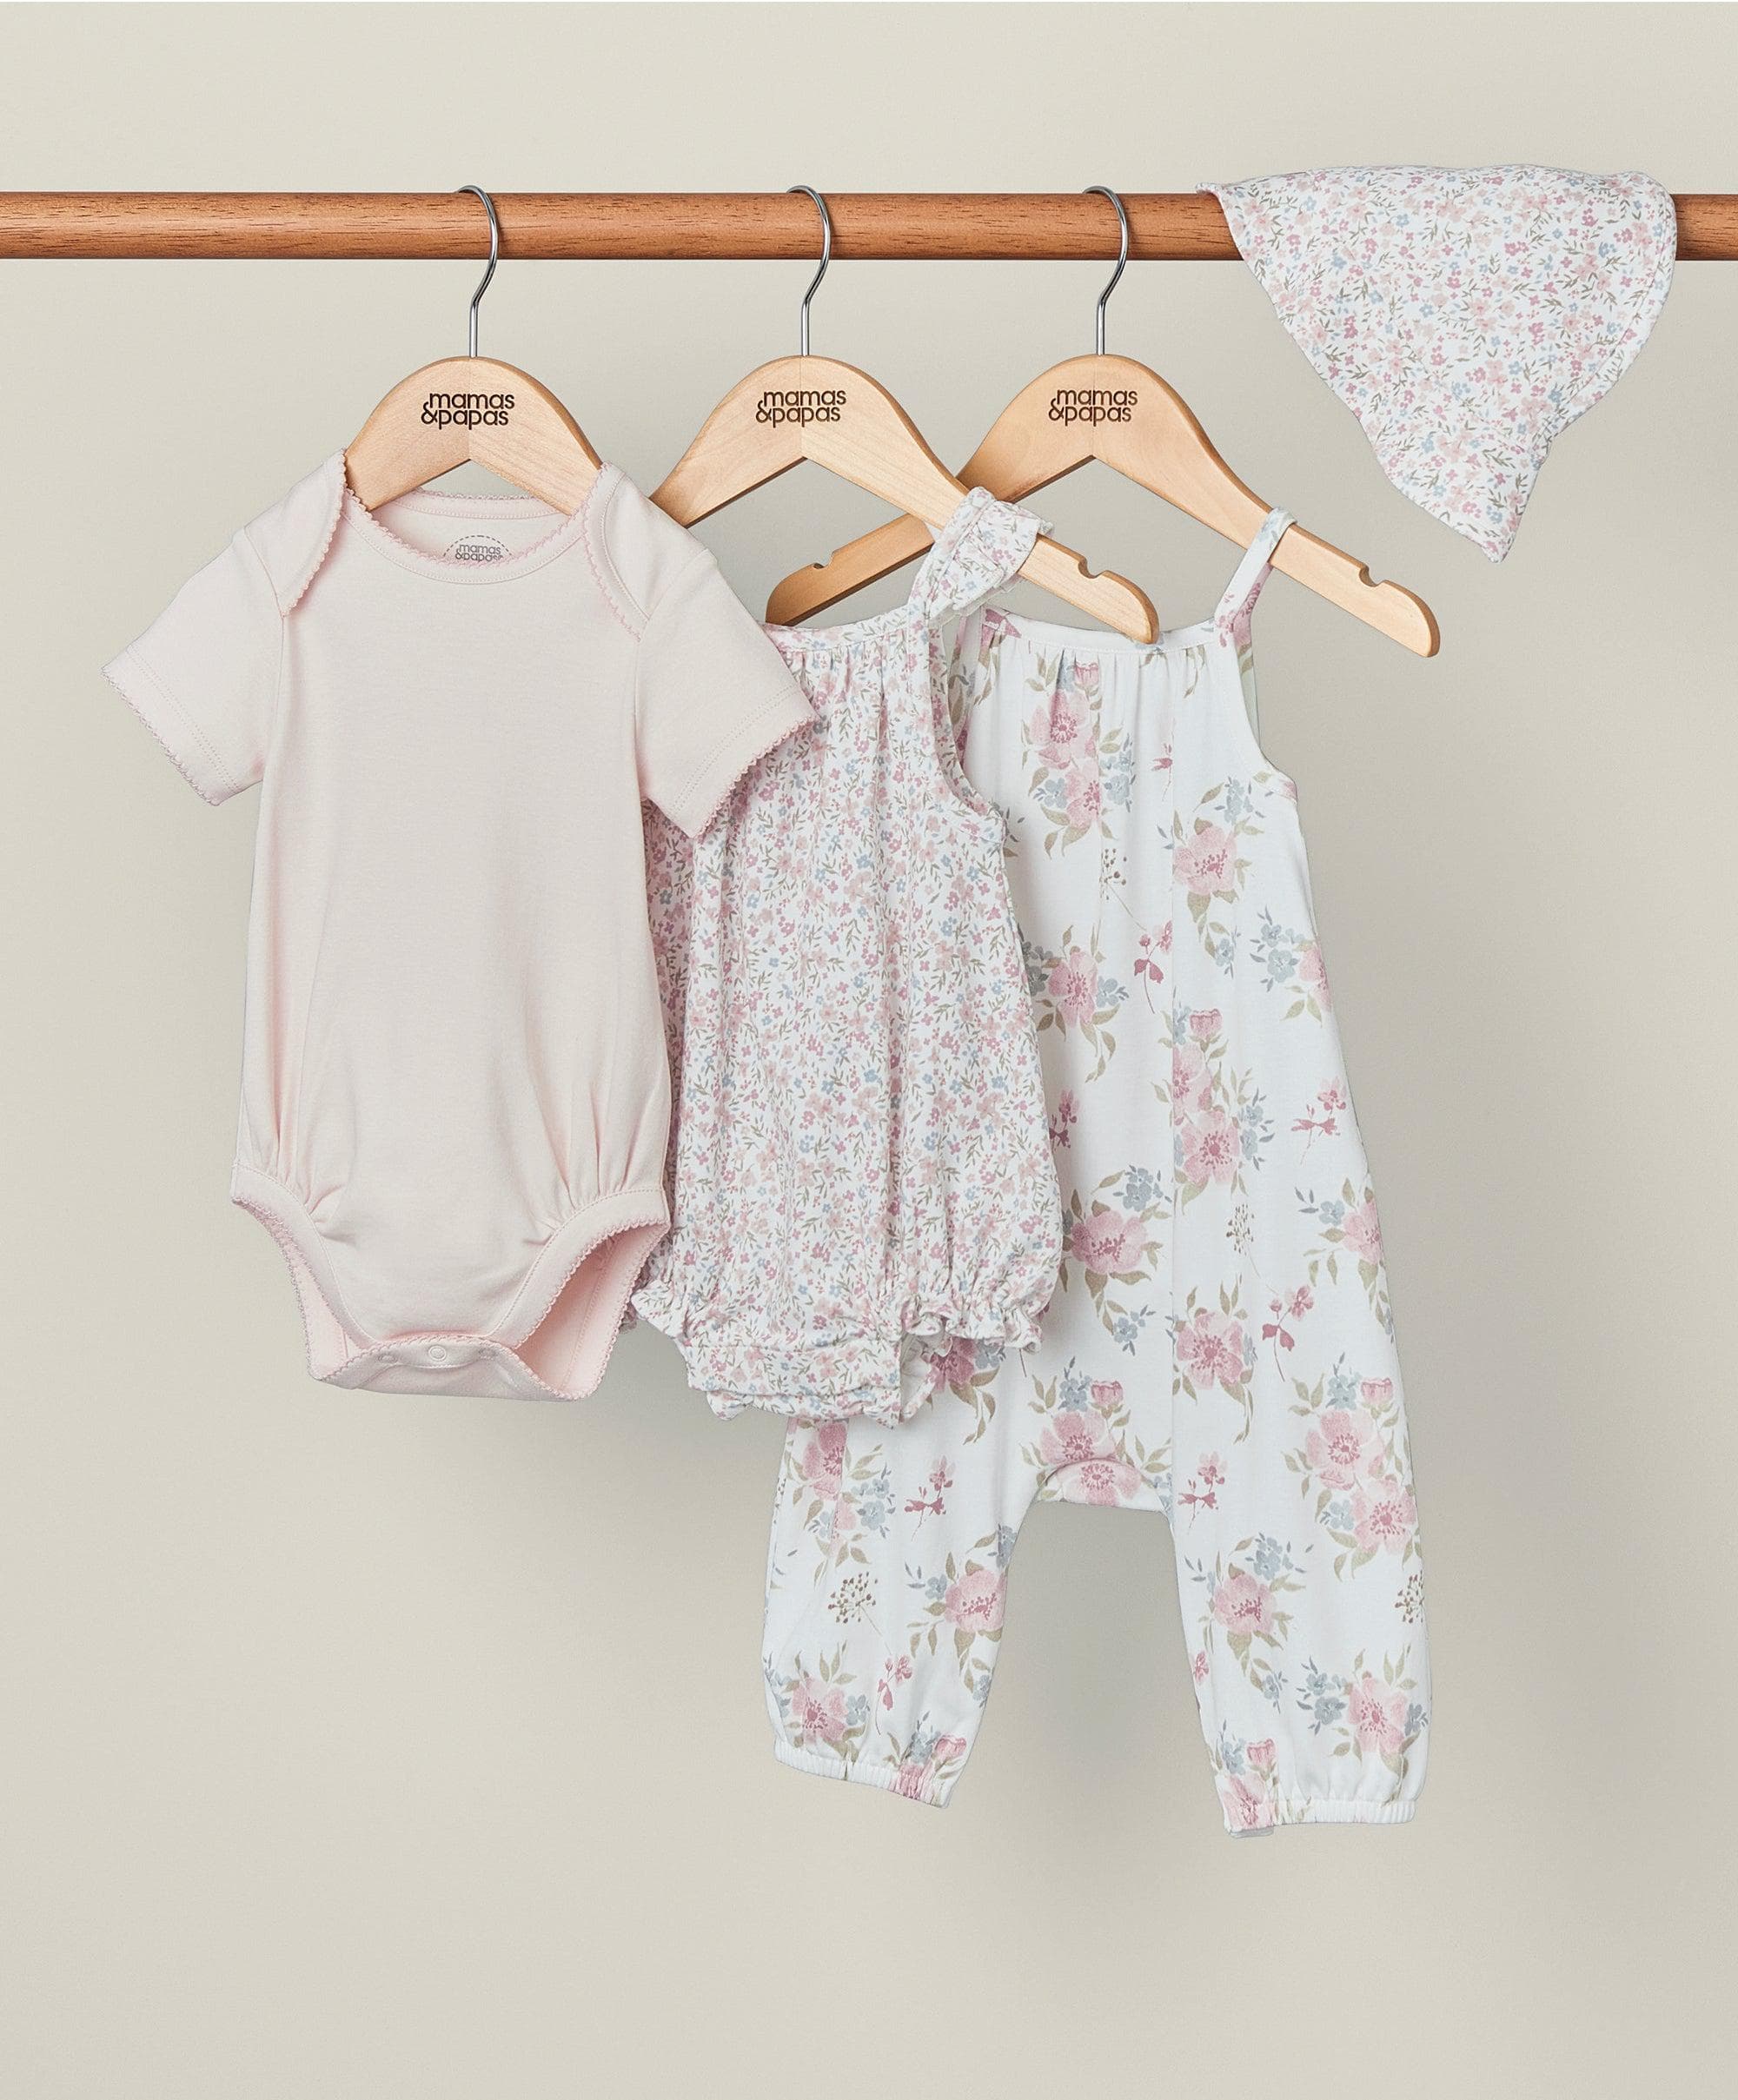 Floral Starter Outfit Set (4 Piece)